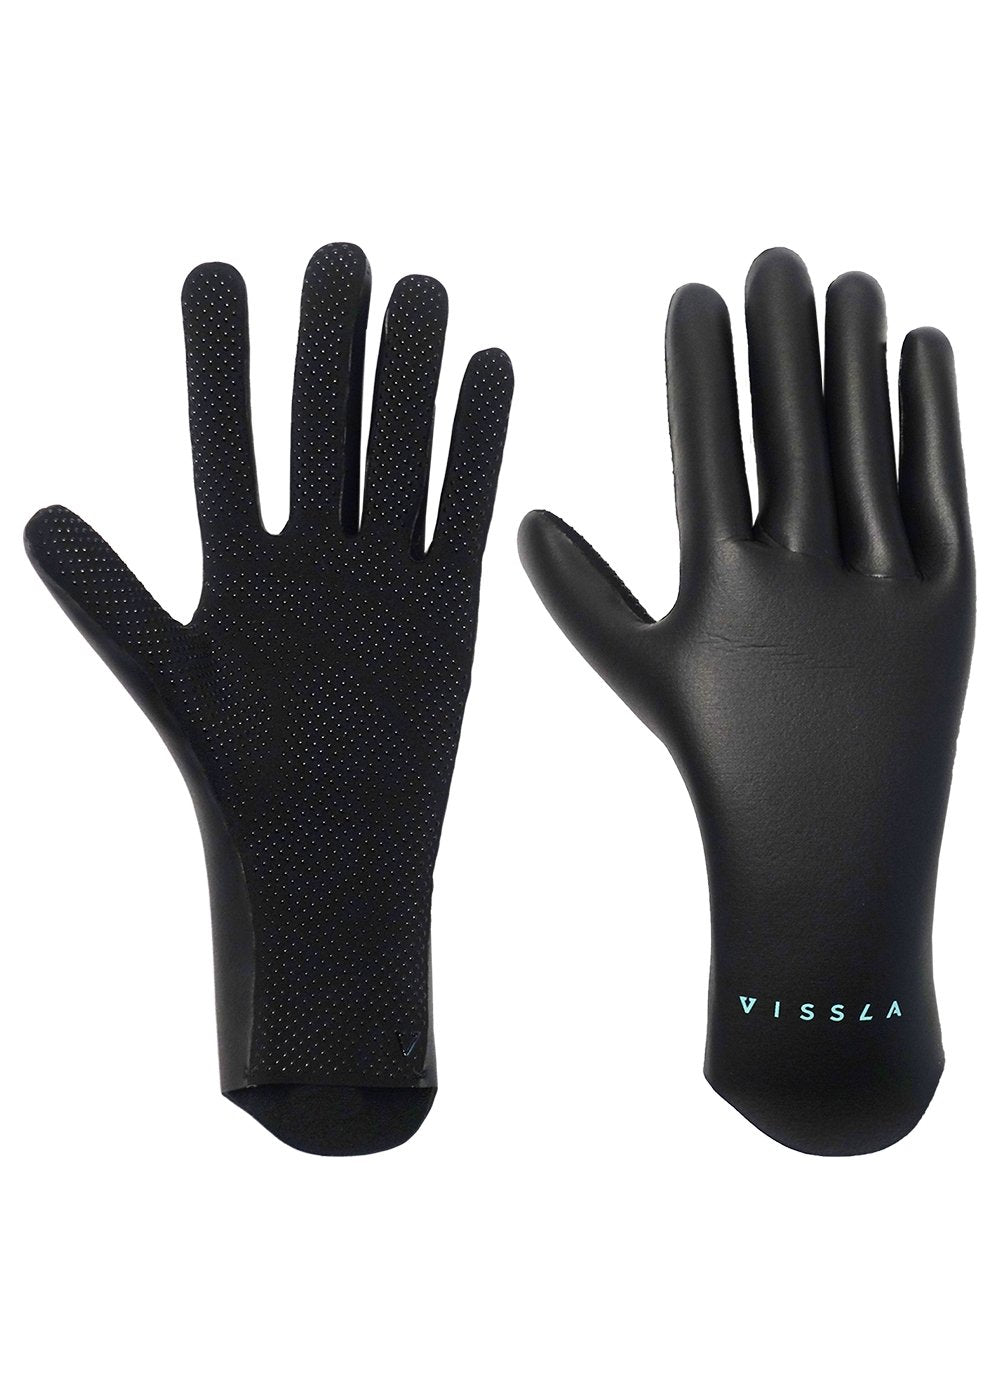 Vissla Black High Seas 1.5mm Wetsuit Gloves. Top and Bottom View.